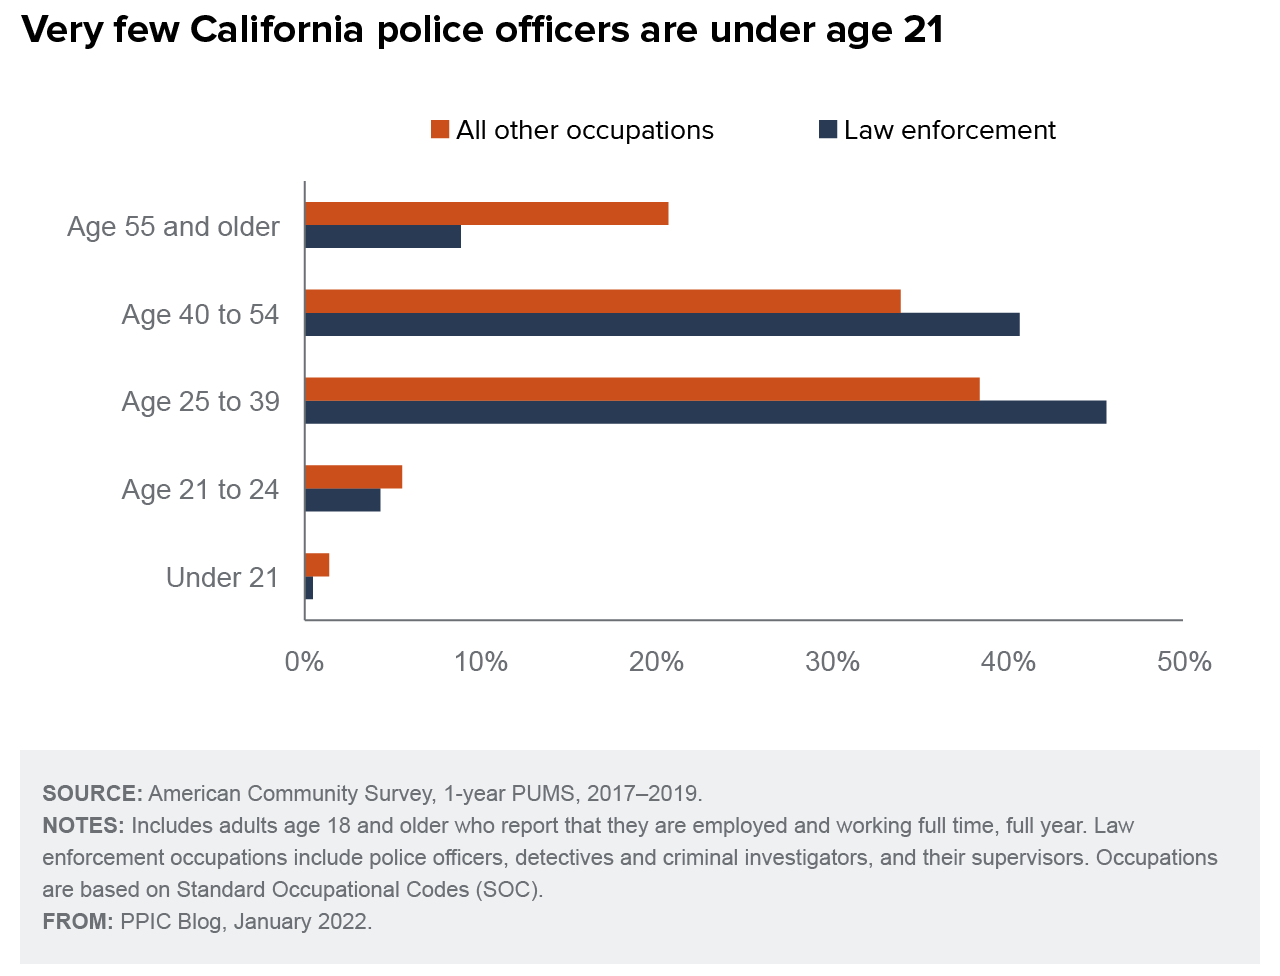 figure - Very few California police officers are under age 21